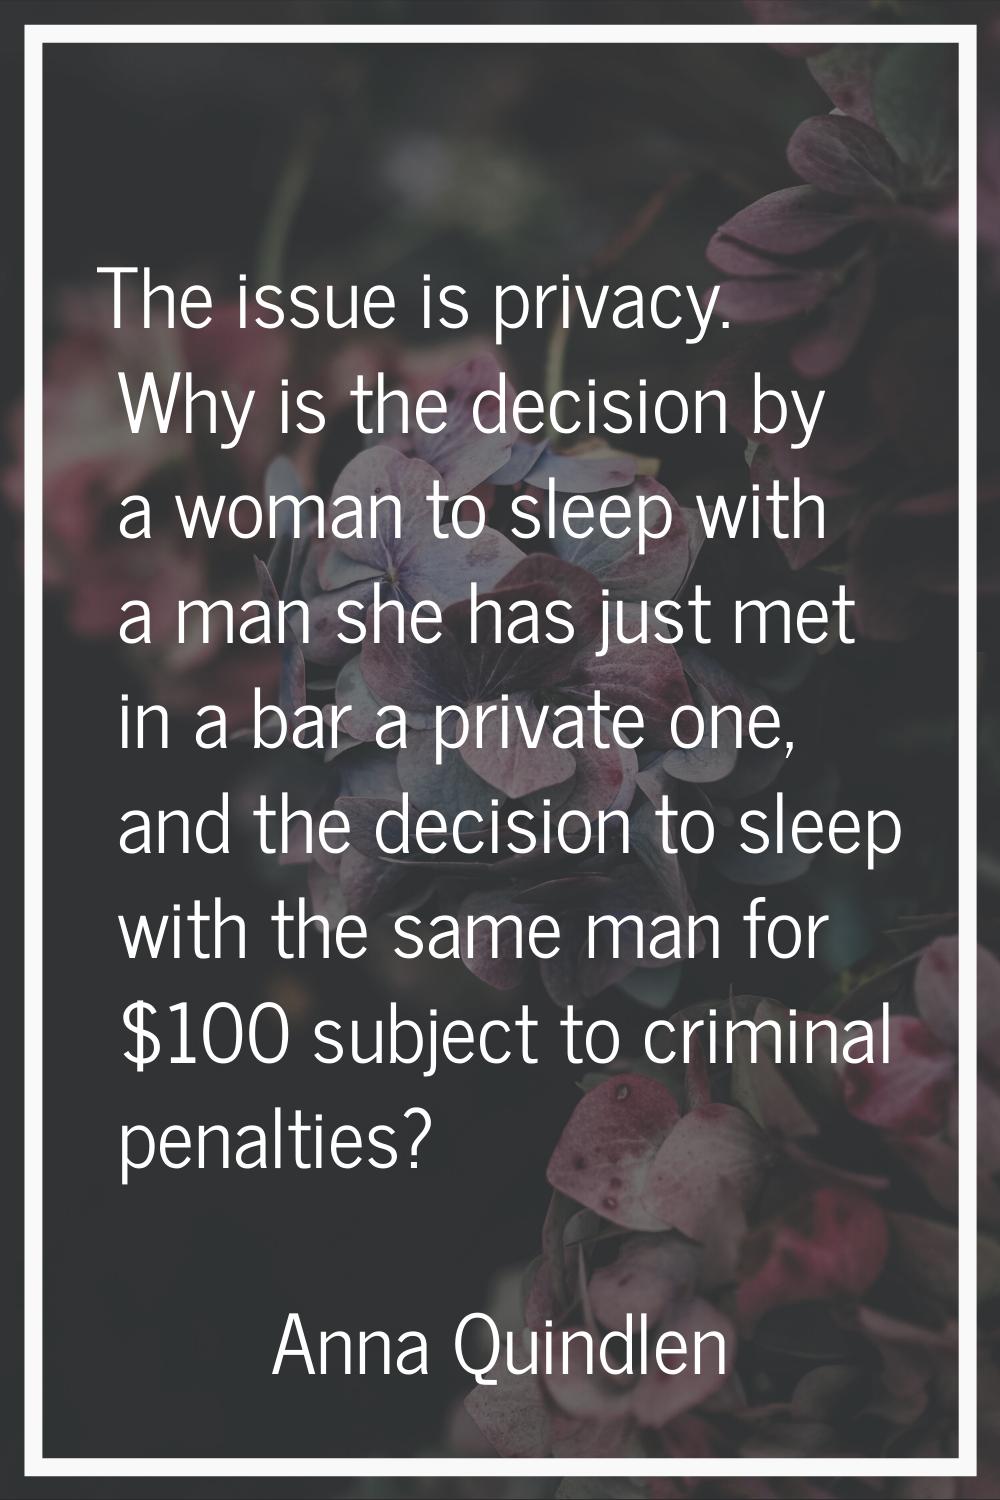 The issue is privacy. Why is the decision by a woman to sleep with a man she has just met in a bar 